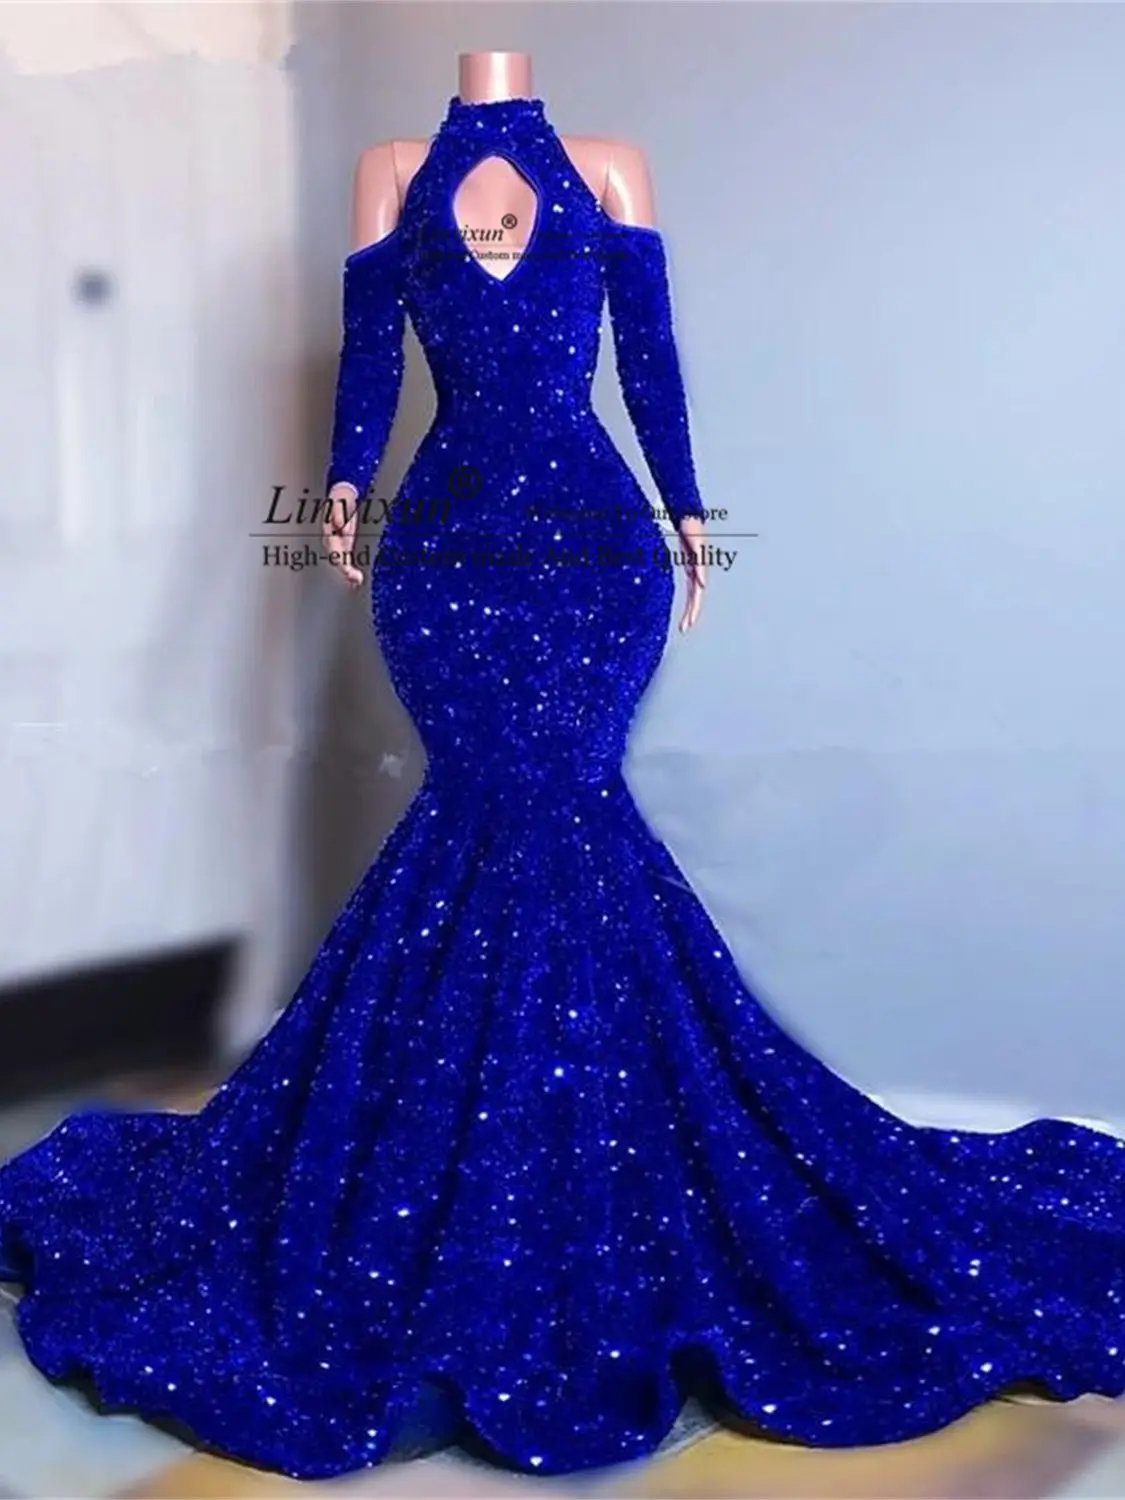 Blue Gown - Weddings & Events - AliExpress